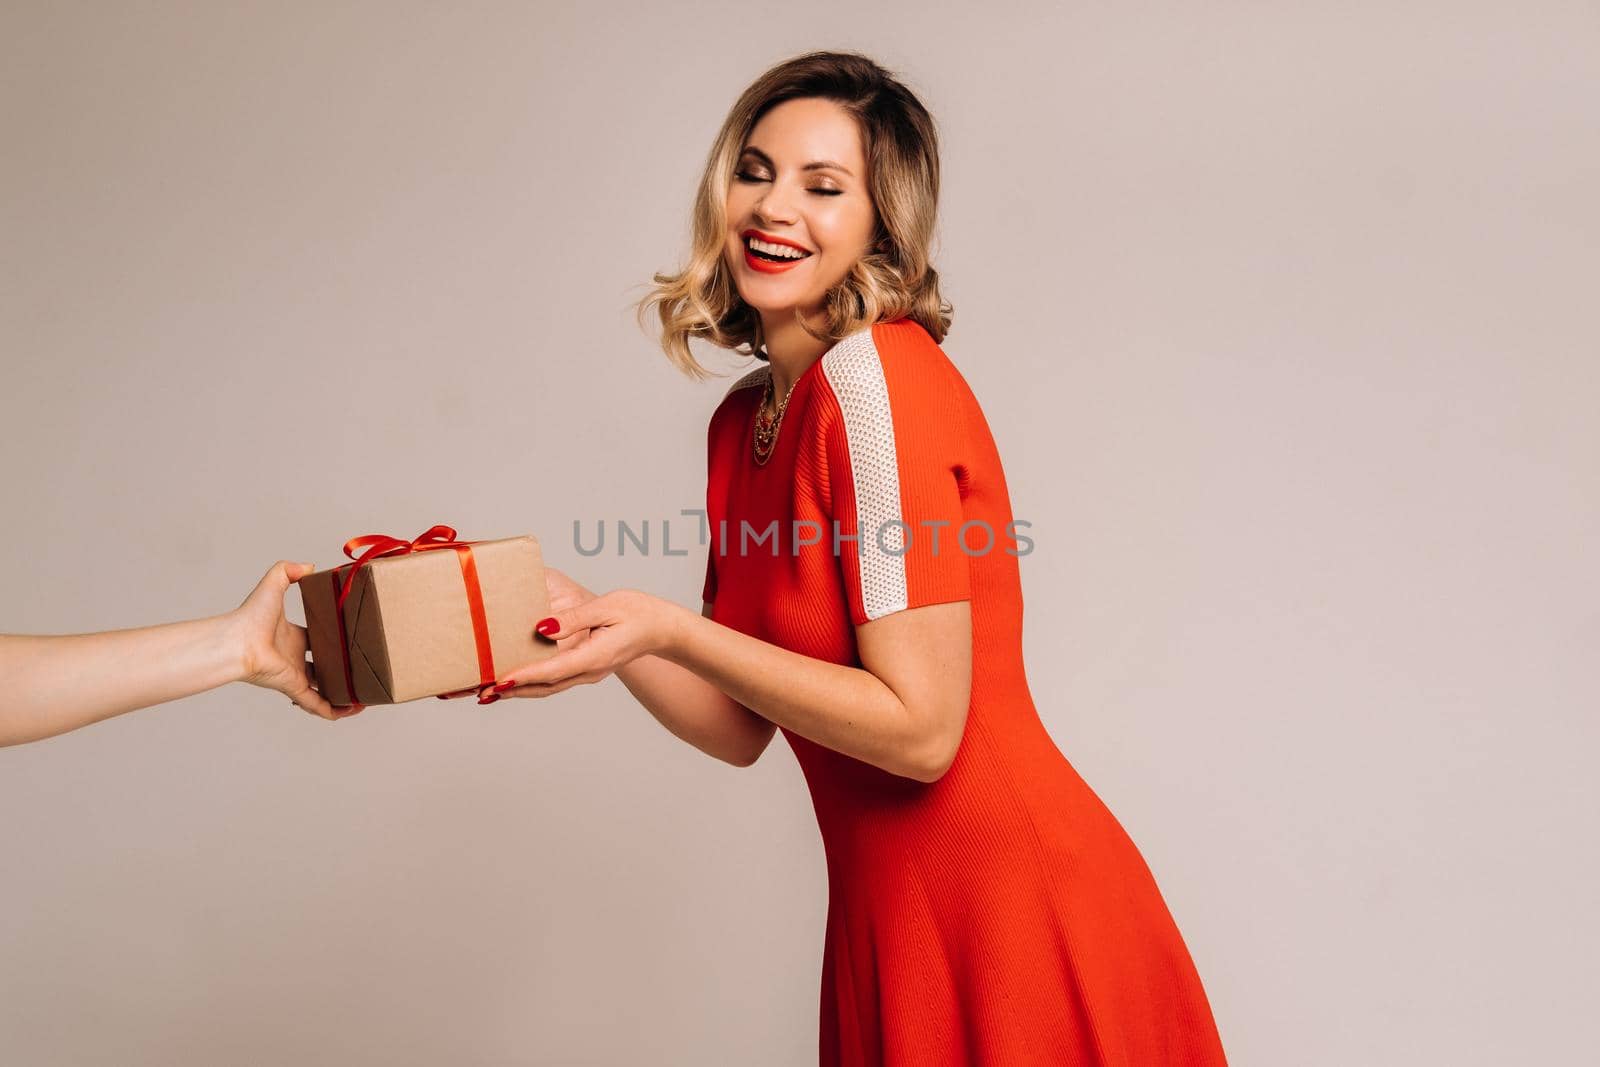 A girl in a red dress is given a gift in her hands on a gray background by Lobachad